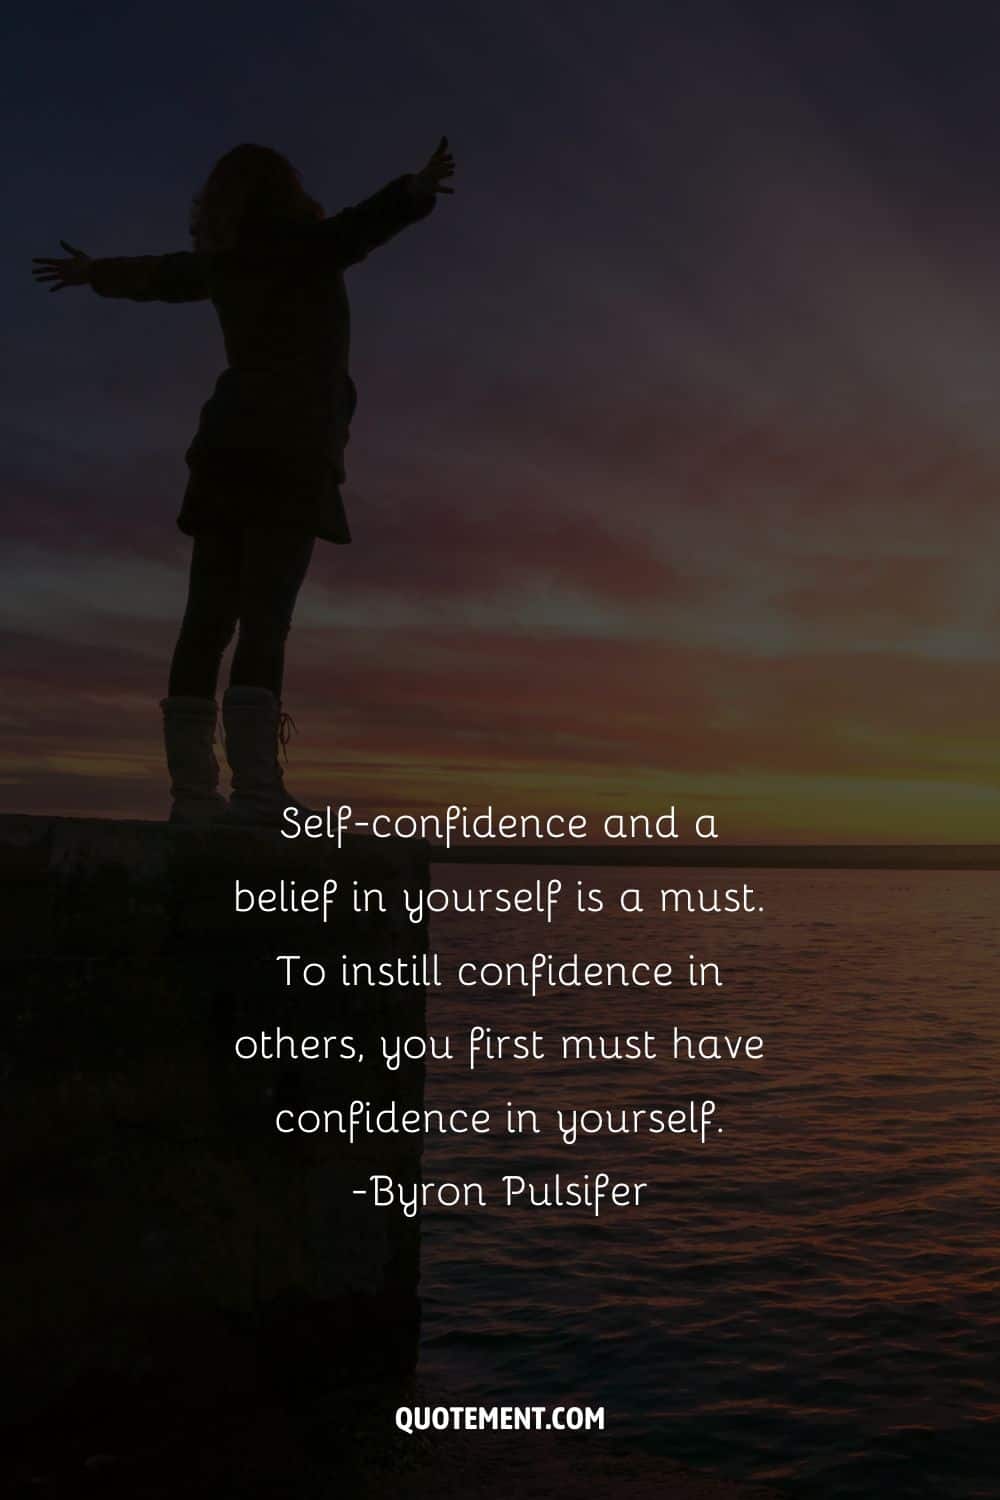 Self-confidence and a belief in yourself is a must